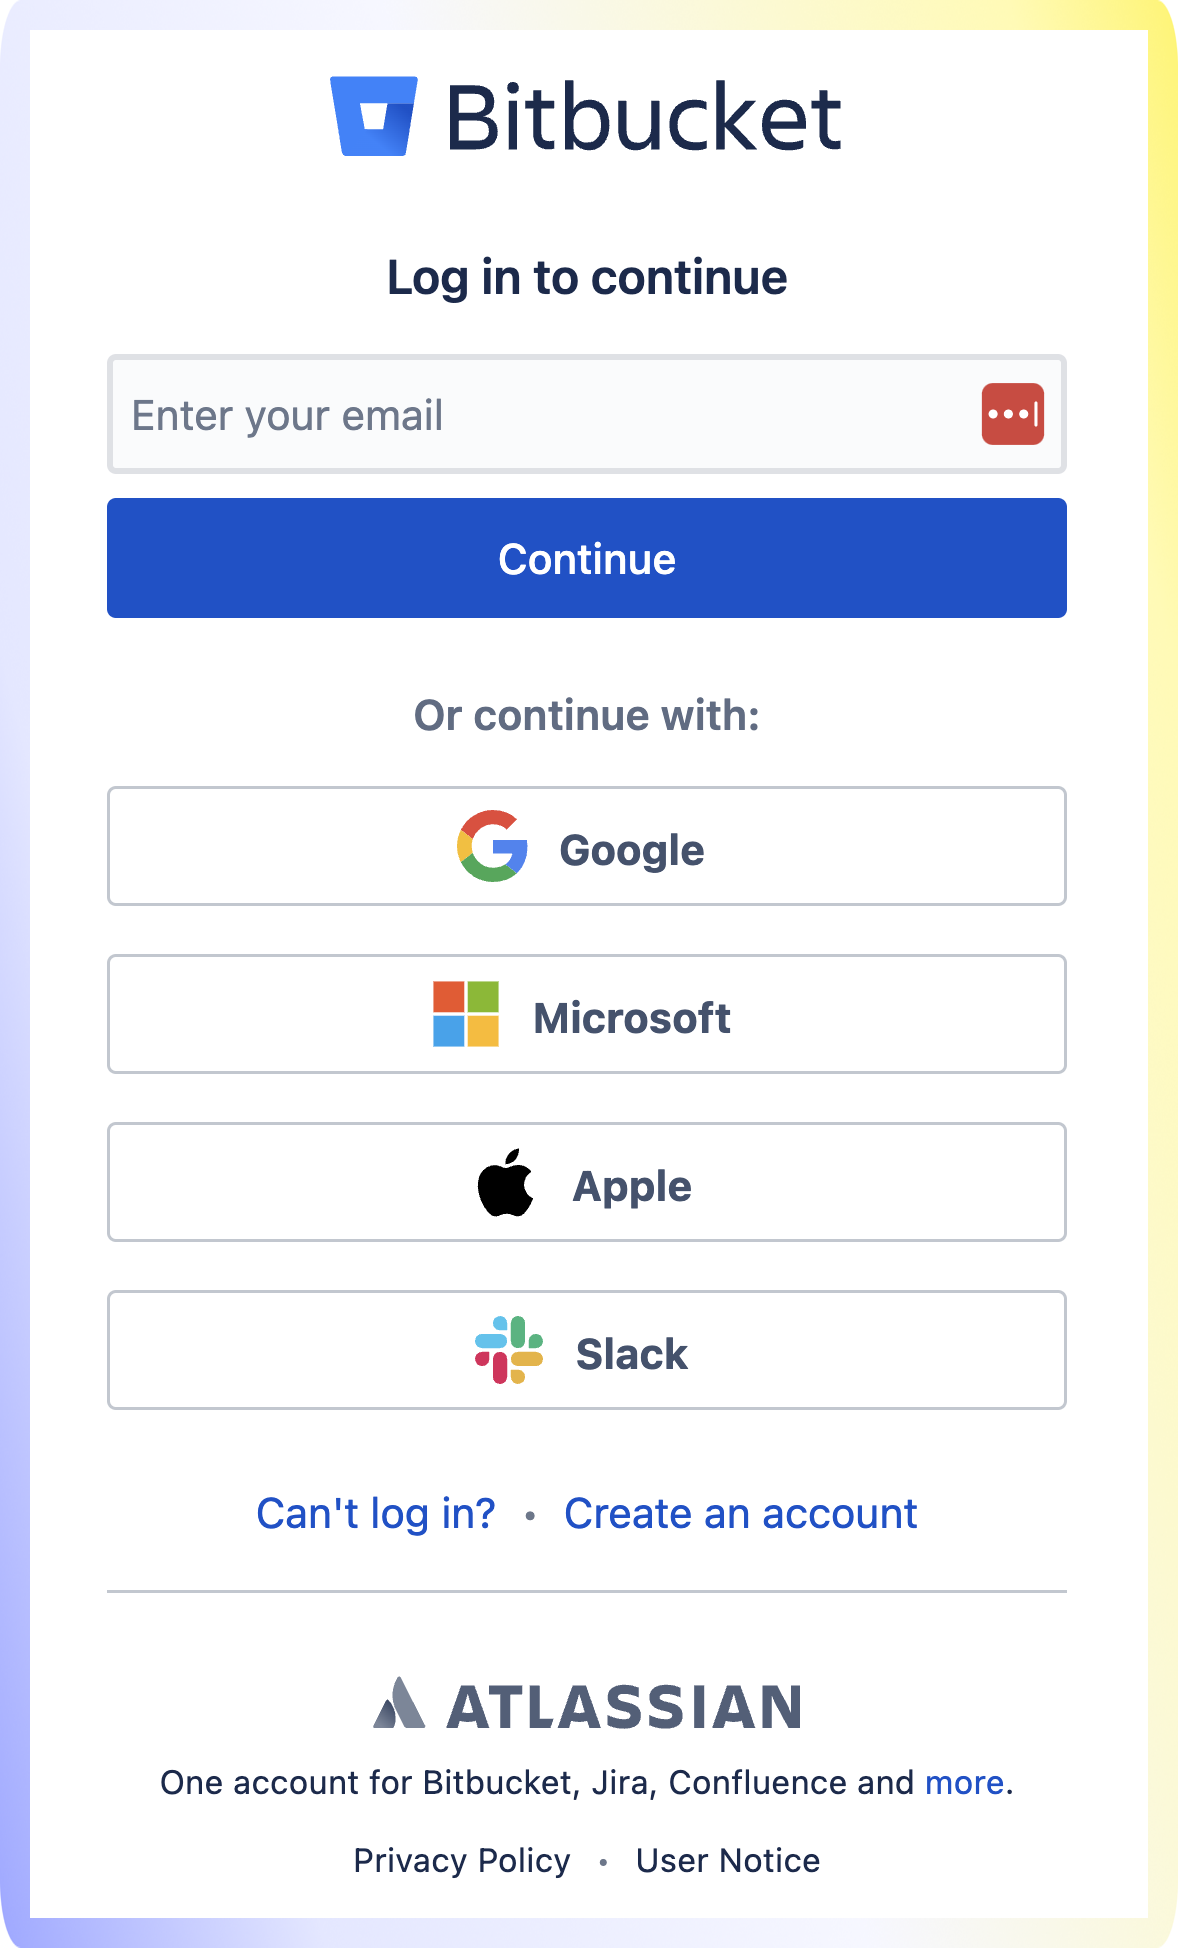 Bitbucket modal to sign into your account